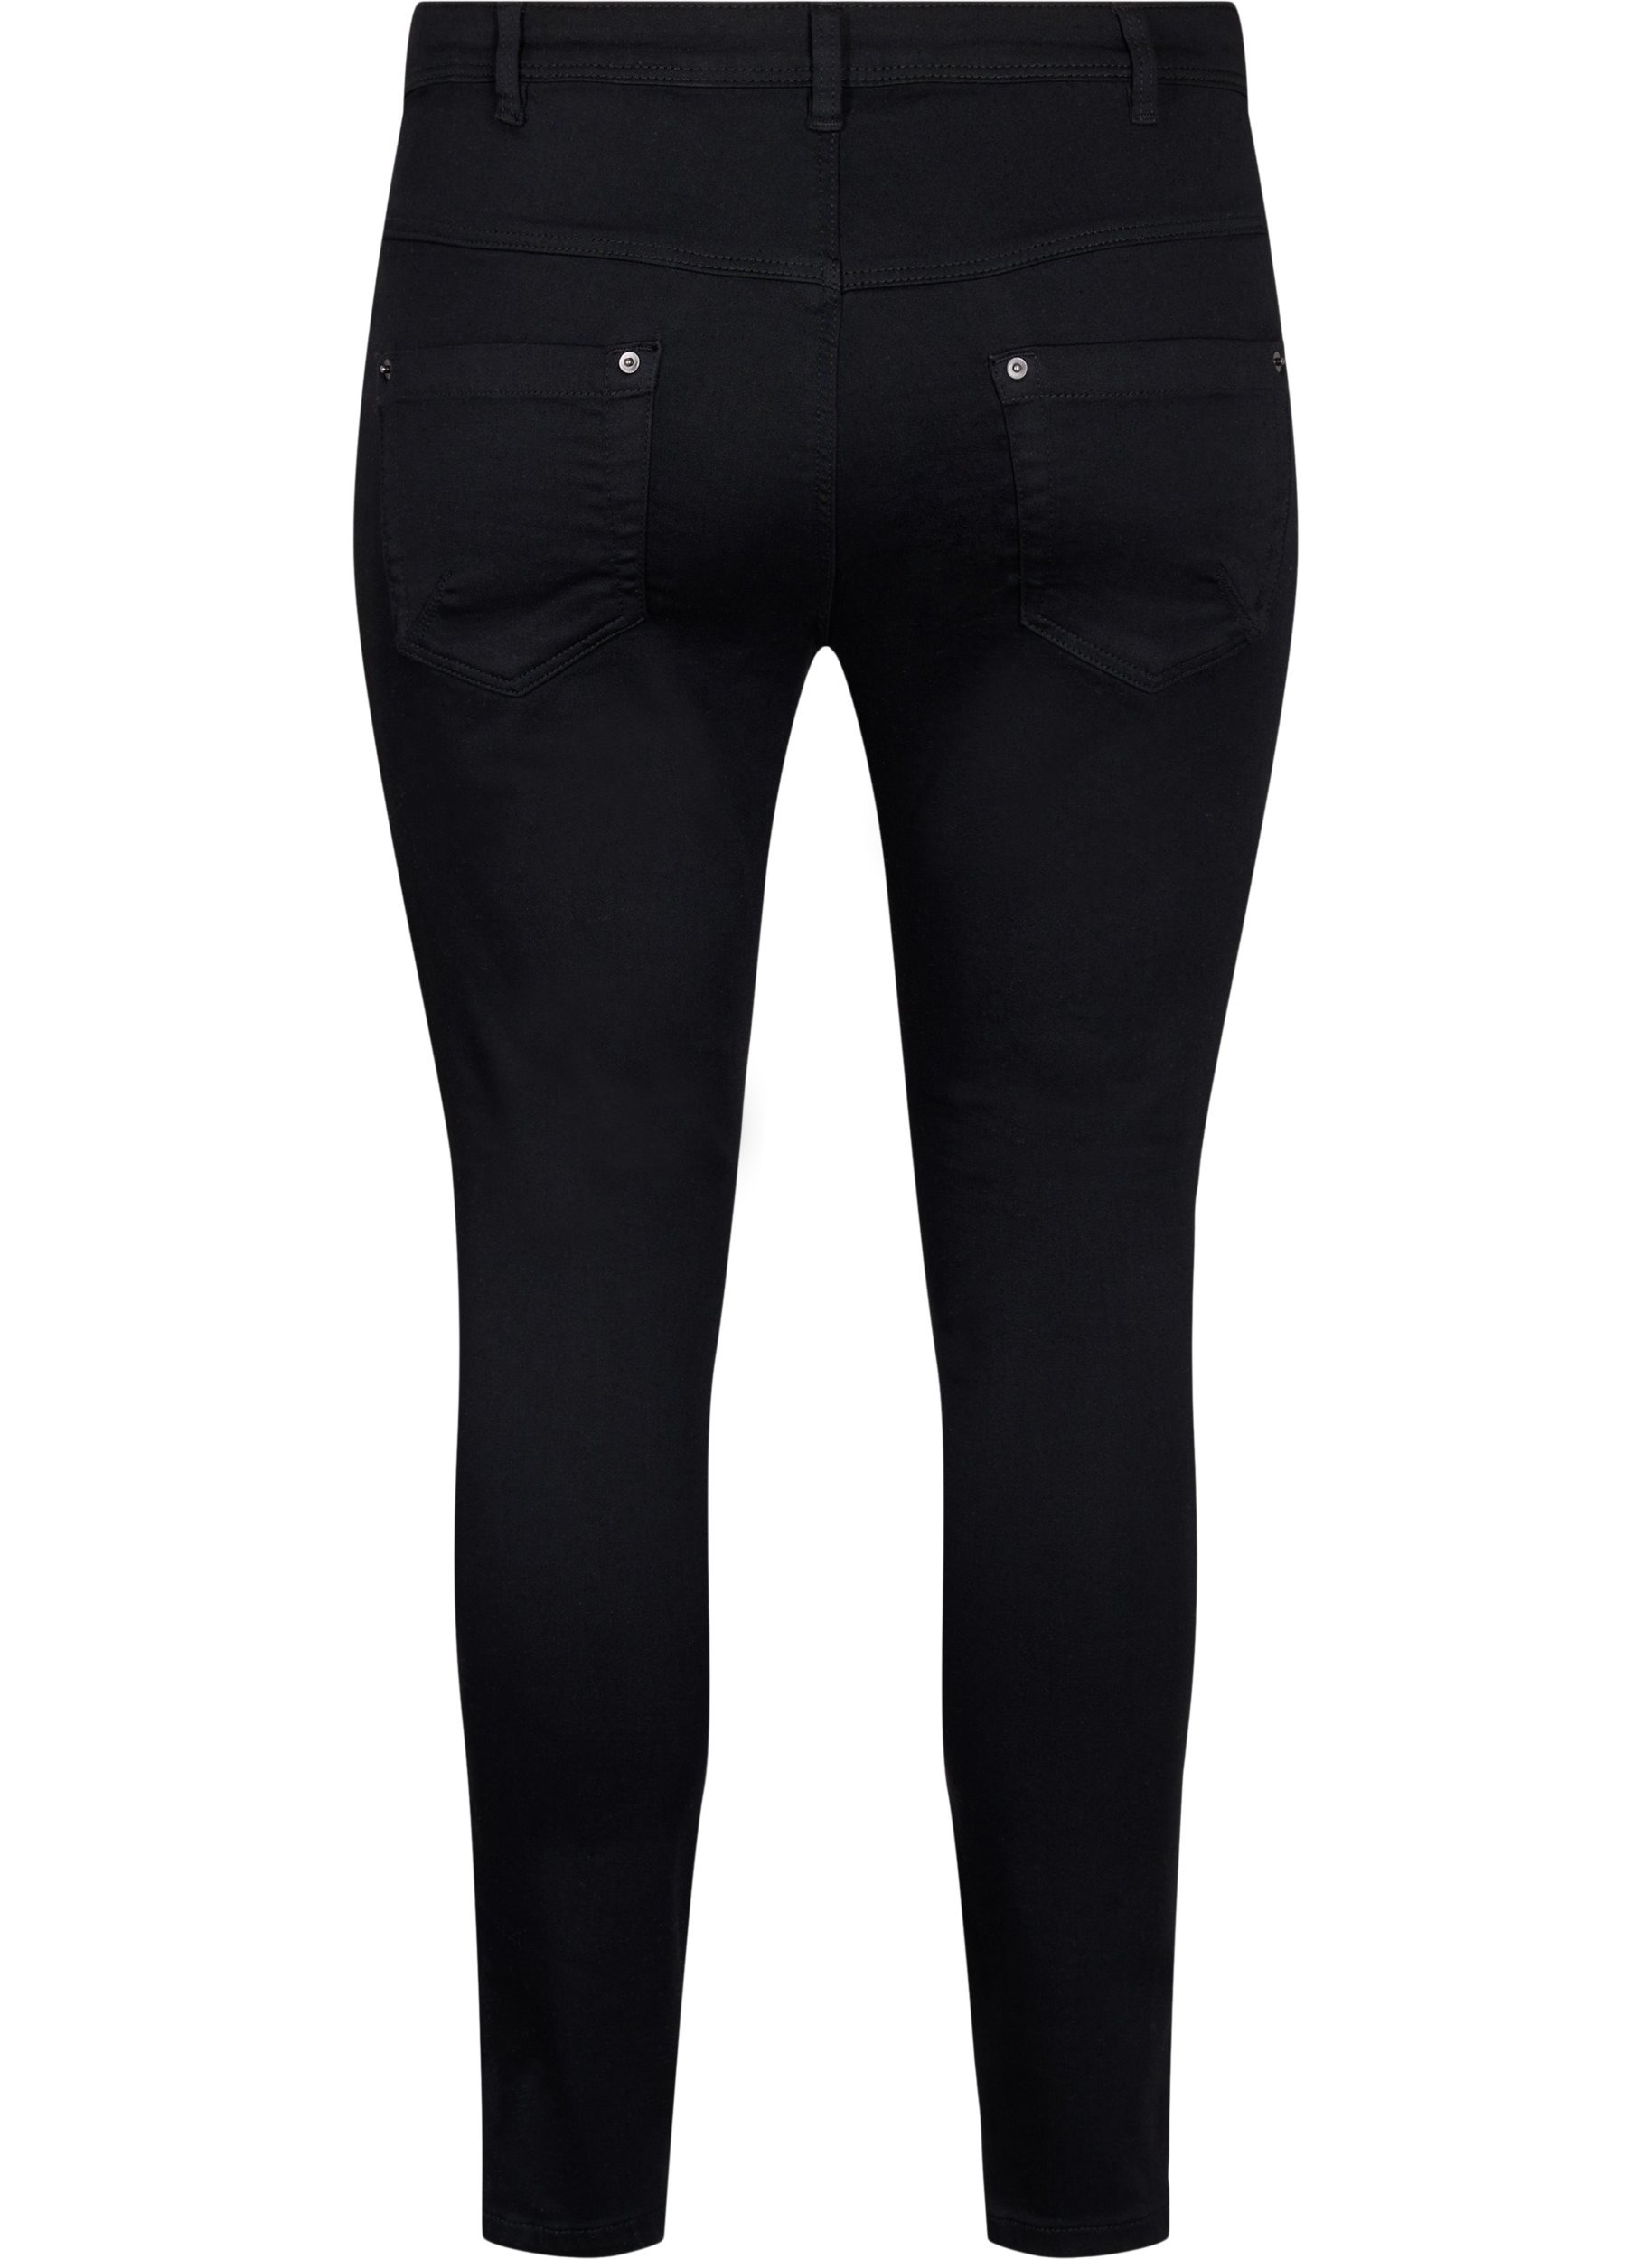 Cropped Amy jeans with a zip, Black denim, Packshot image number 1